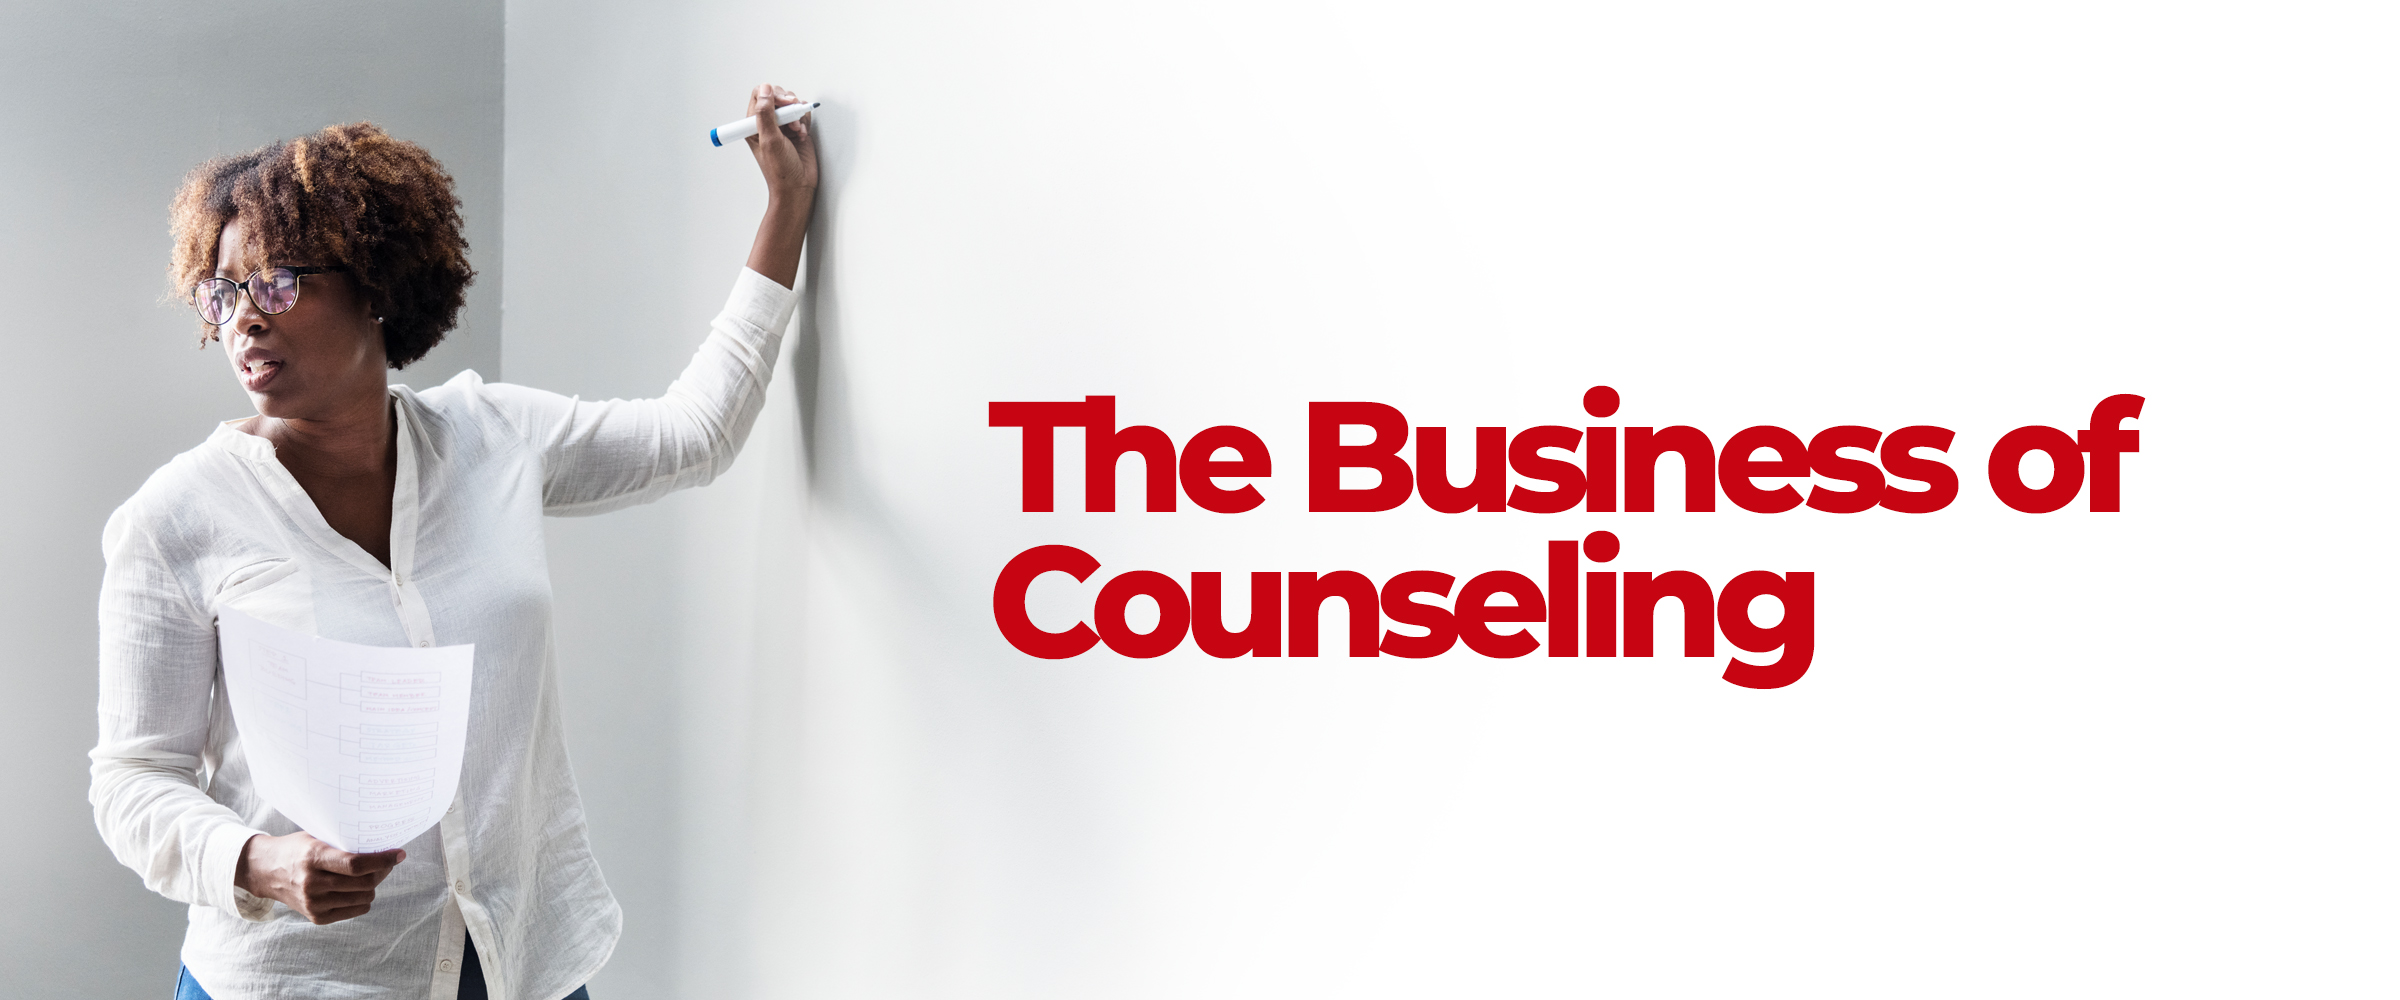 The Business of Counselling